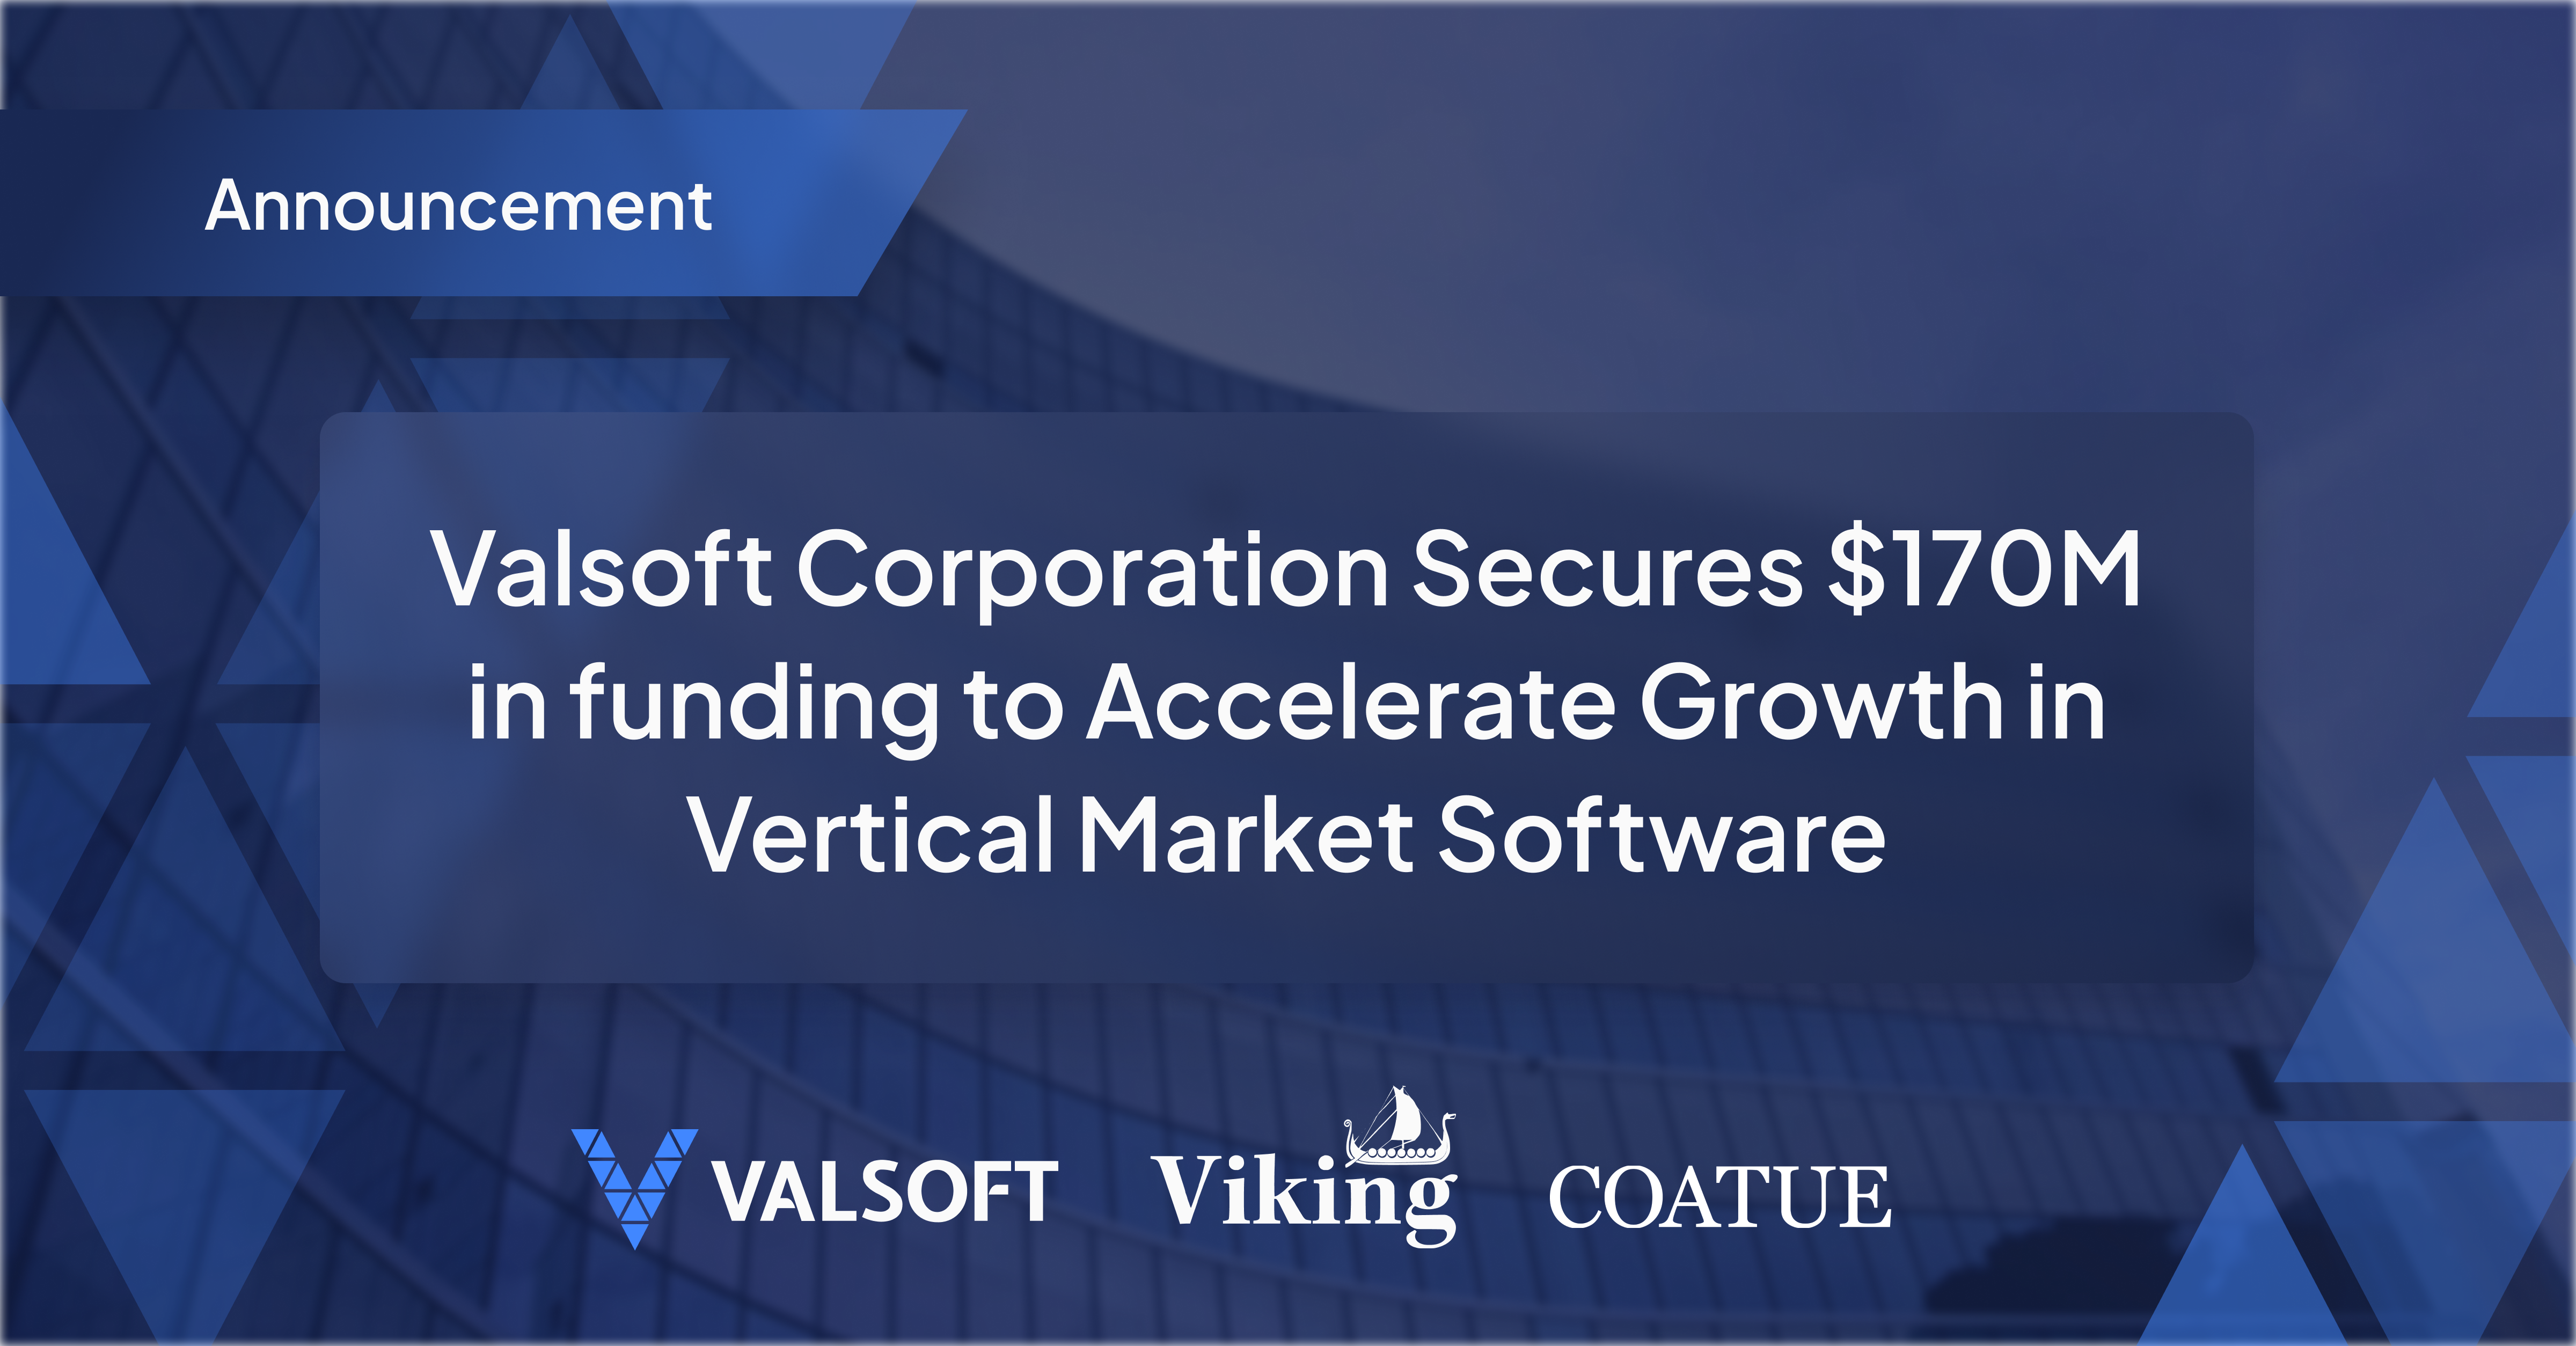 Valsoft Corporation Raises Funding to Accelerate Growth in Vertical Market Software